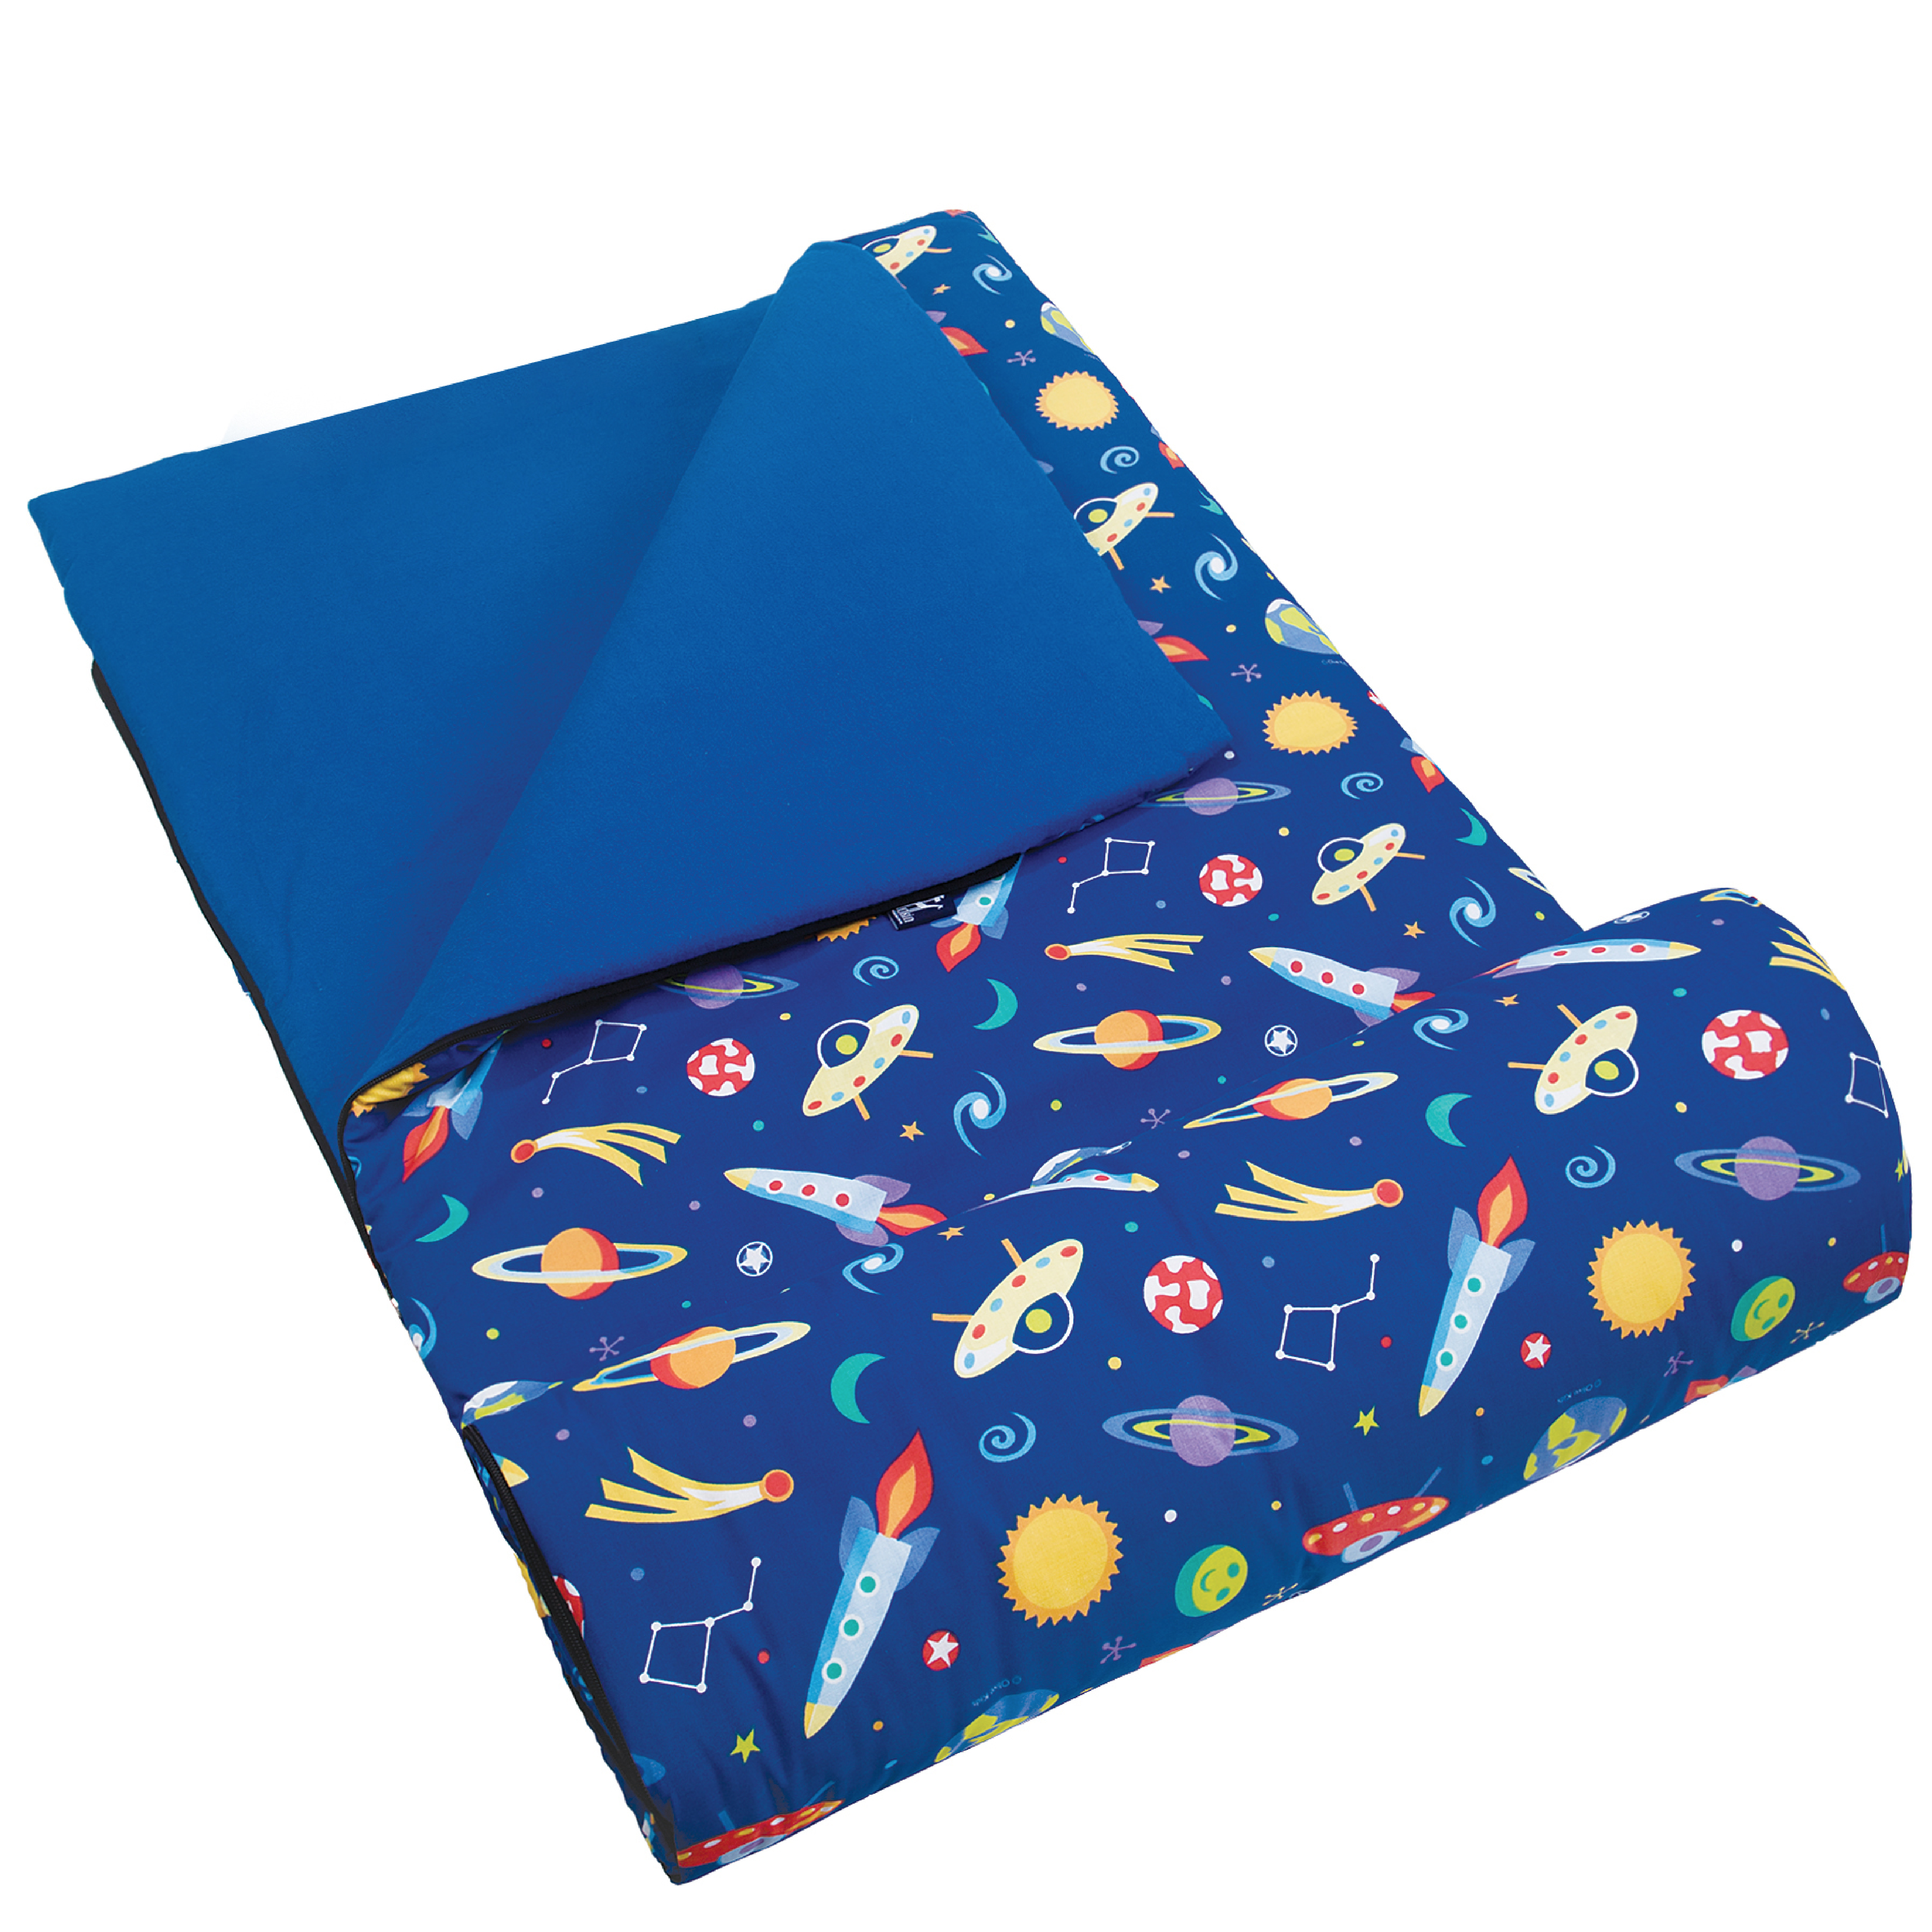 Out of this World Original Sleeping Bag - image 1 of 8